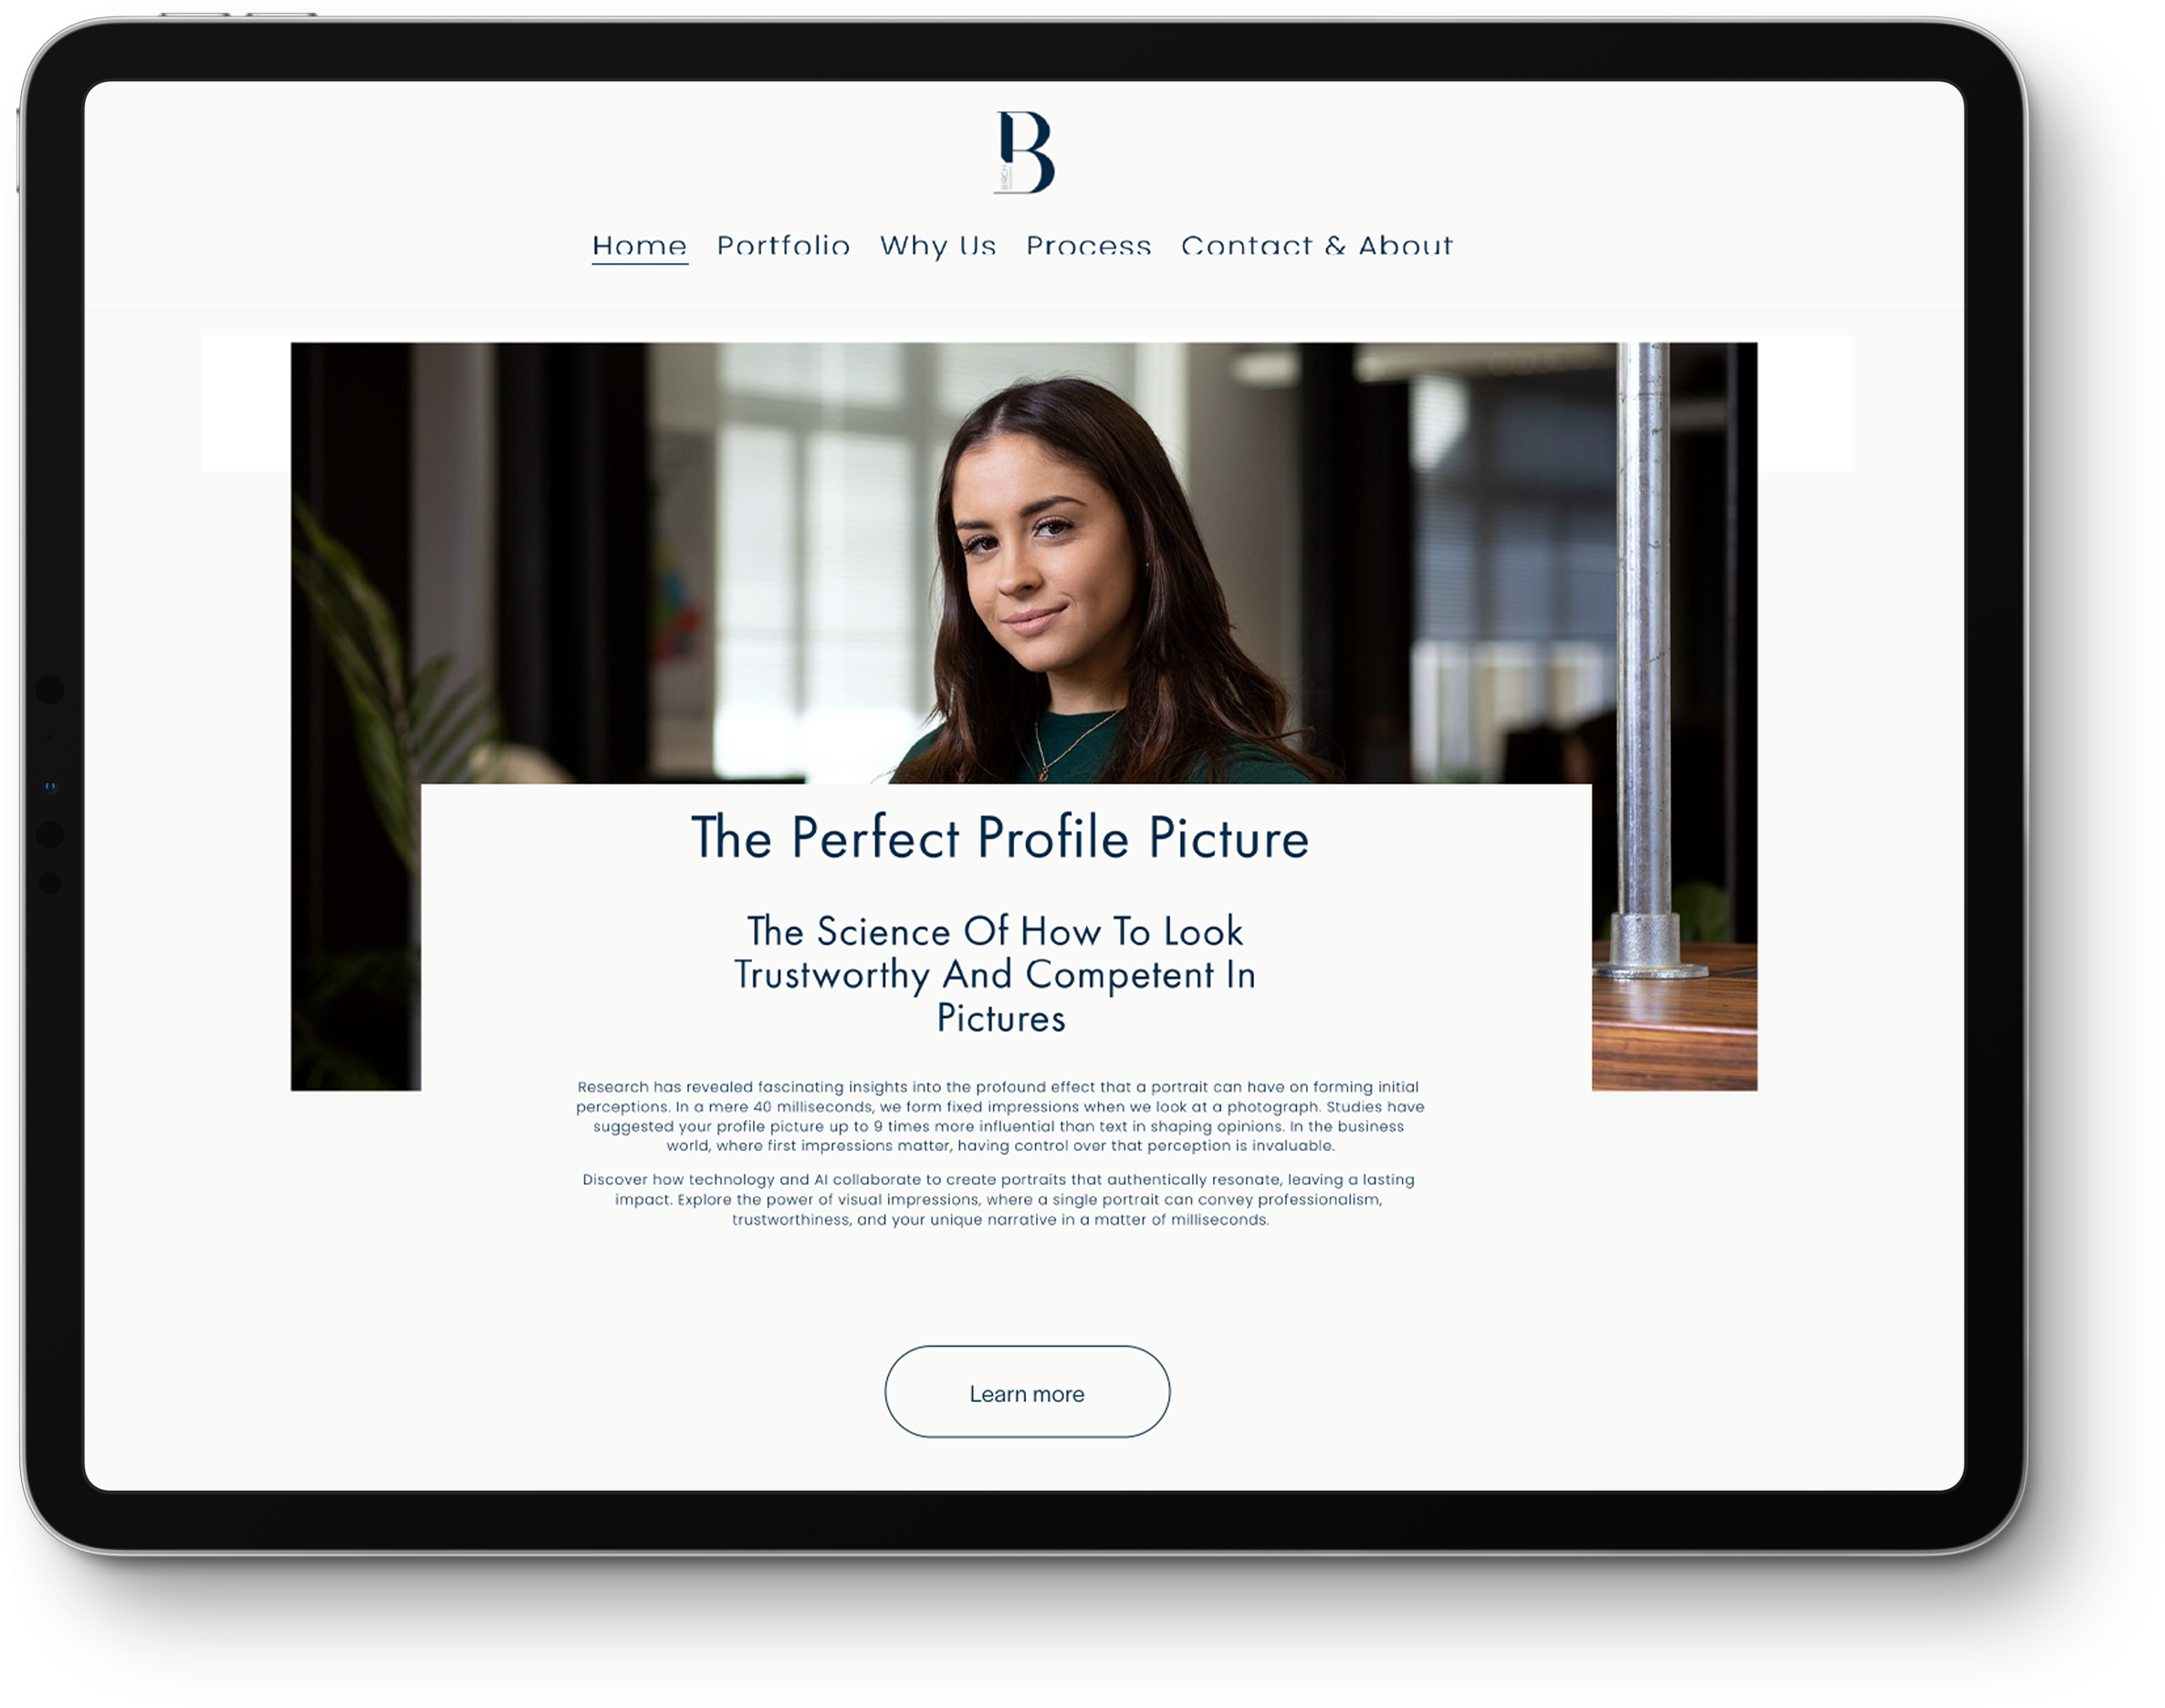 An iPad displaying a page from the website. An image shows a woman smiling at the camera. Below is some text on the perfect profile picture - a excerpt from a different page on the website